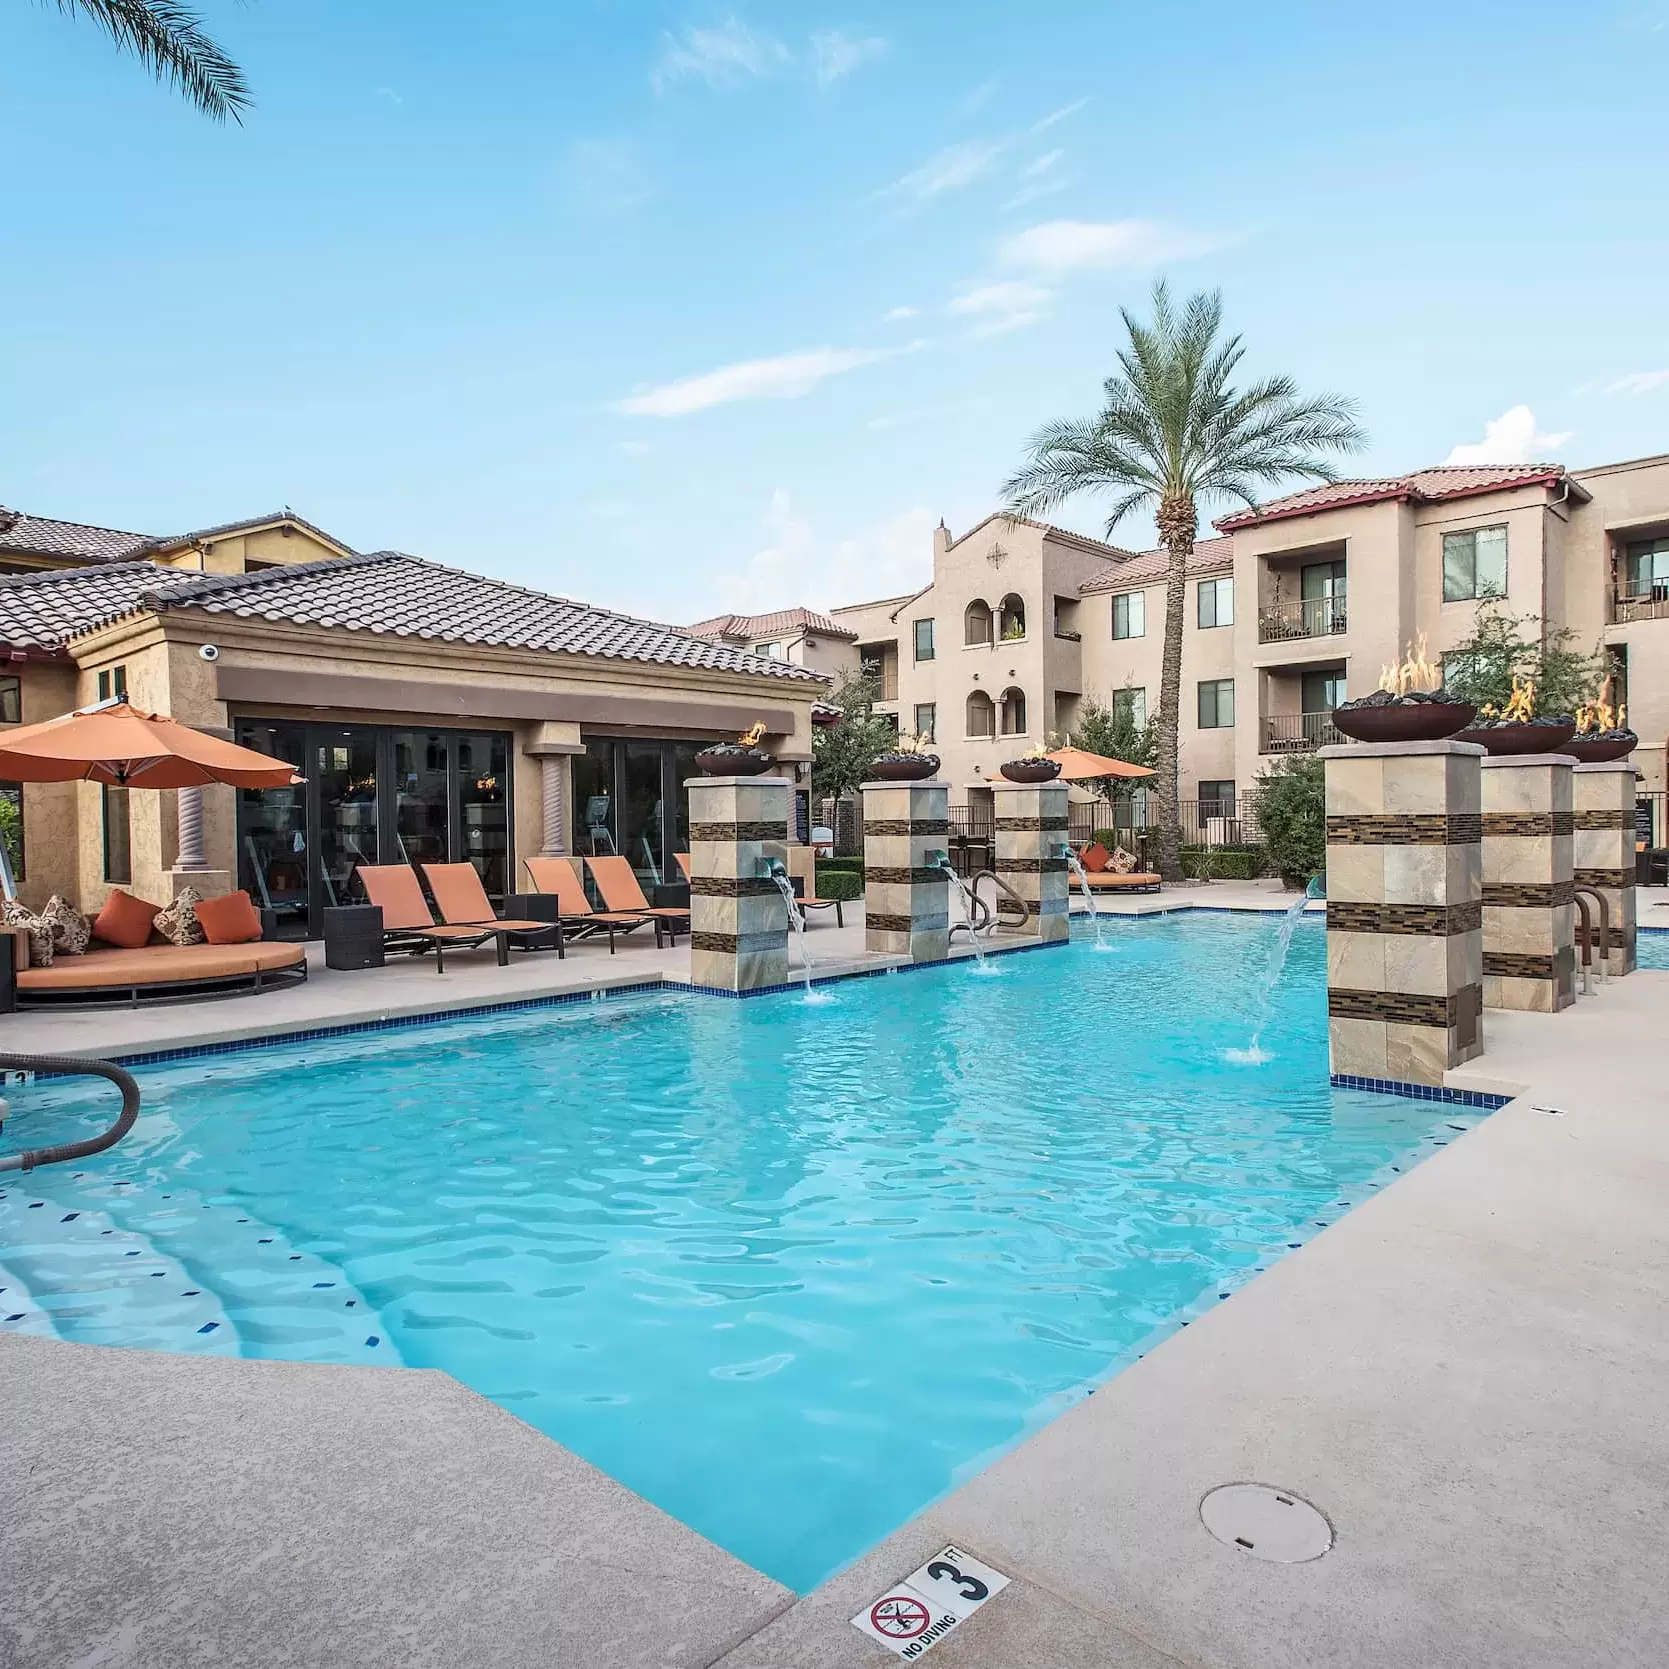 A pool surrounded by lounge chairs and palm trees at Liv Avenida in Chandler, Az.